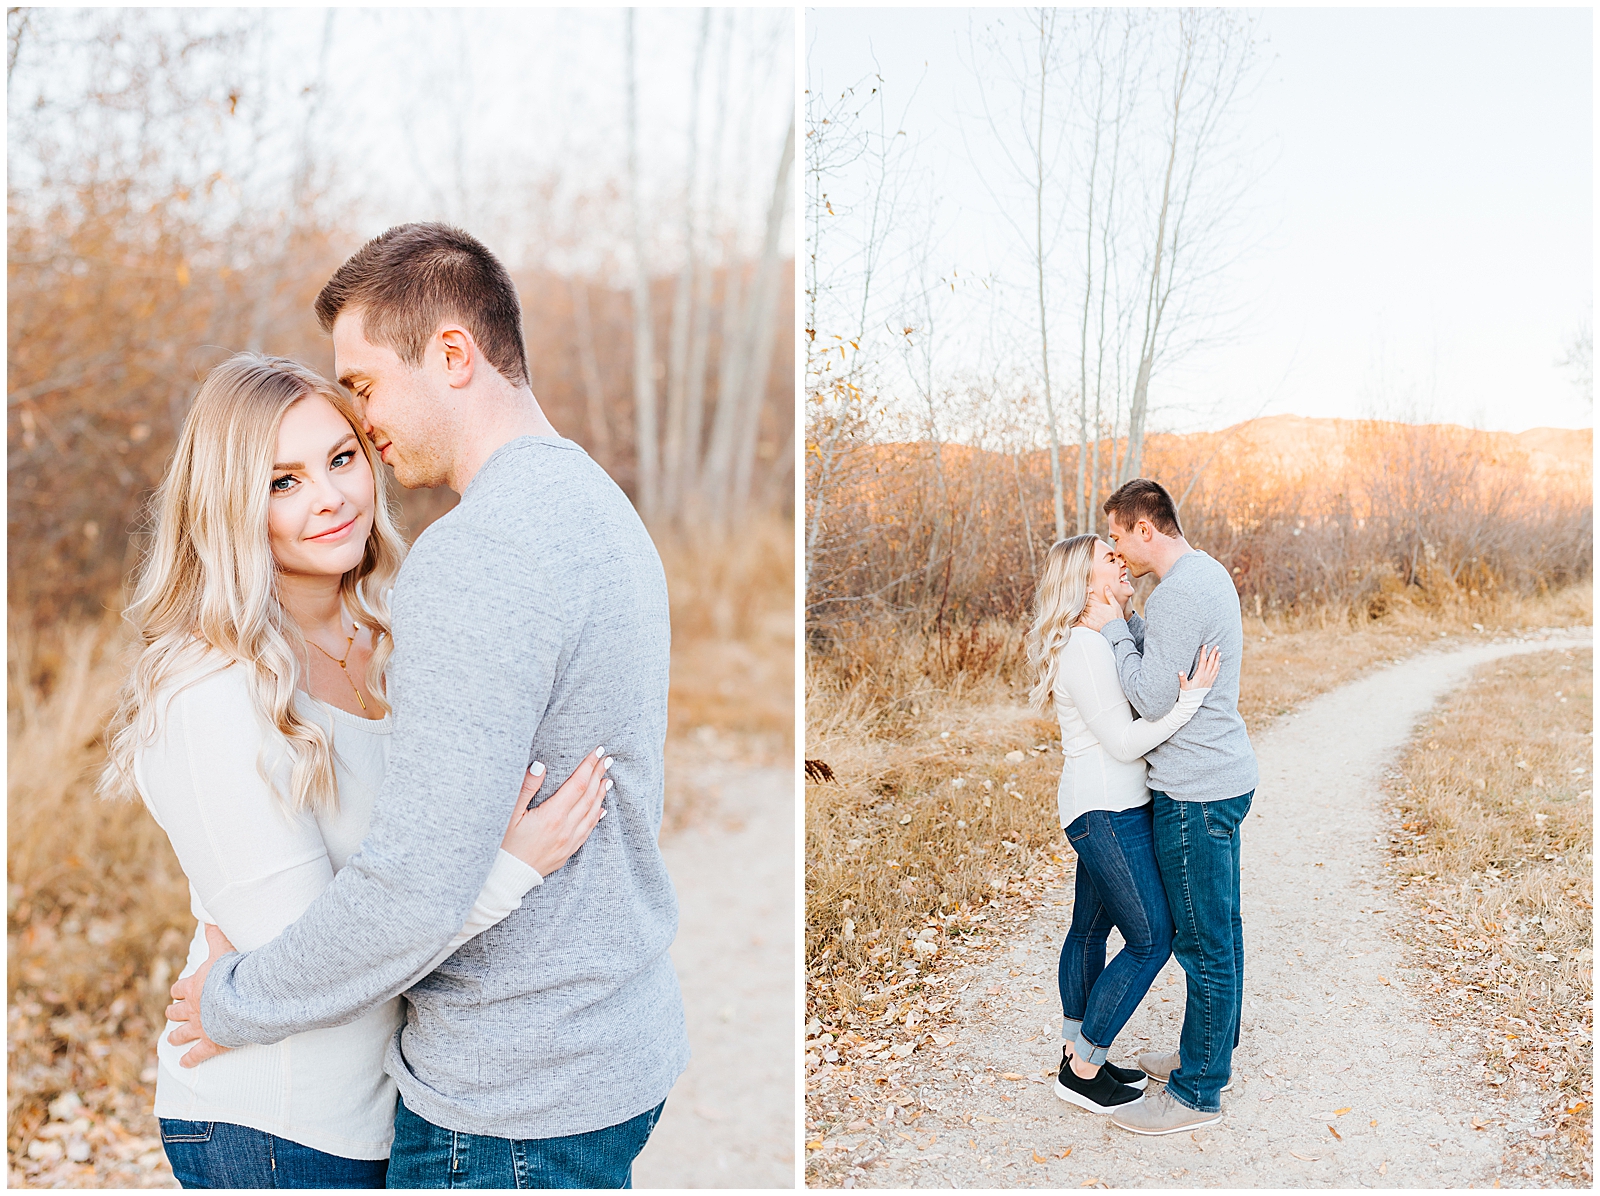 November Boise Engagement Session by the River